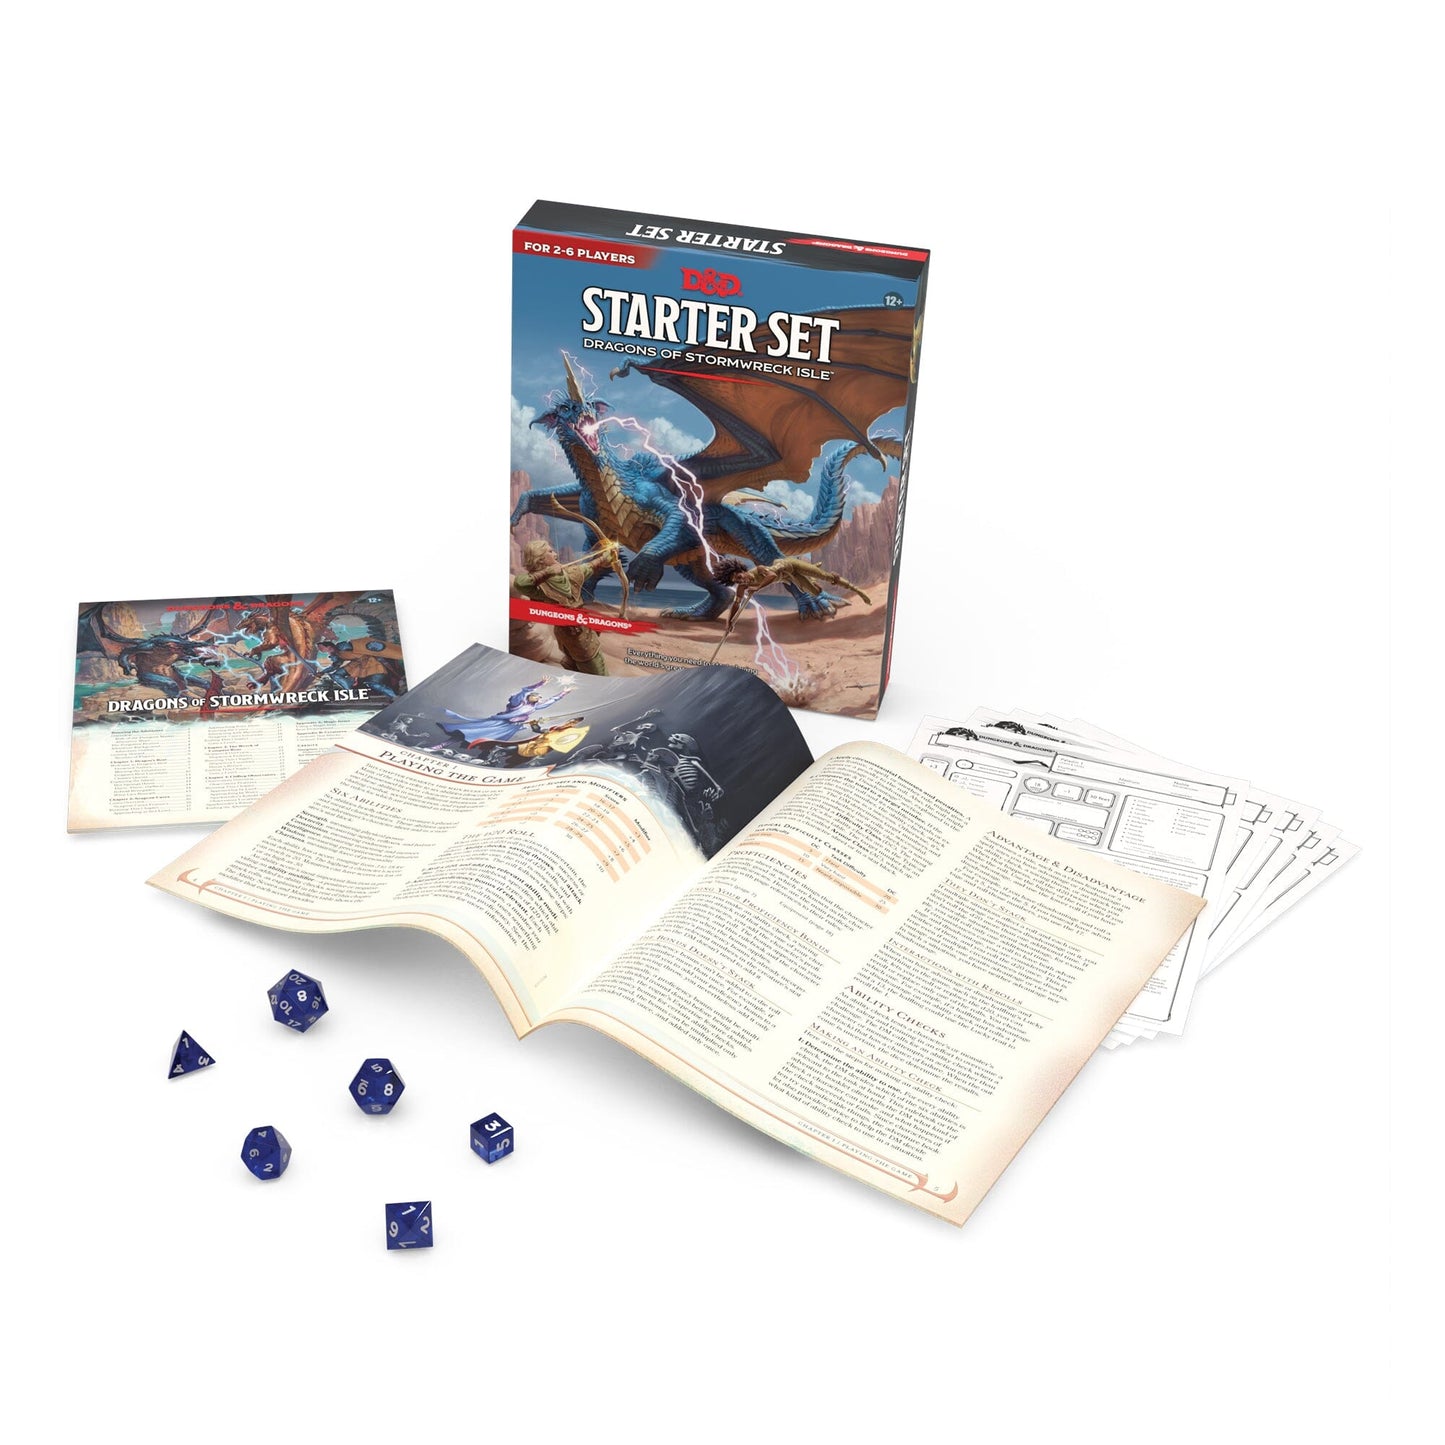 Dungeons & Dragons Starter Set: Dragons of Stormwreck Isle - D&D 5e RPG Wizards of the Coast 